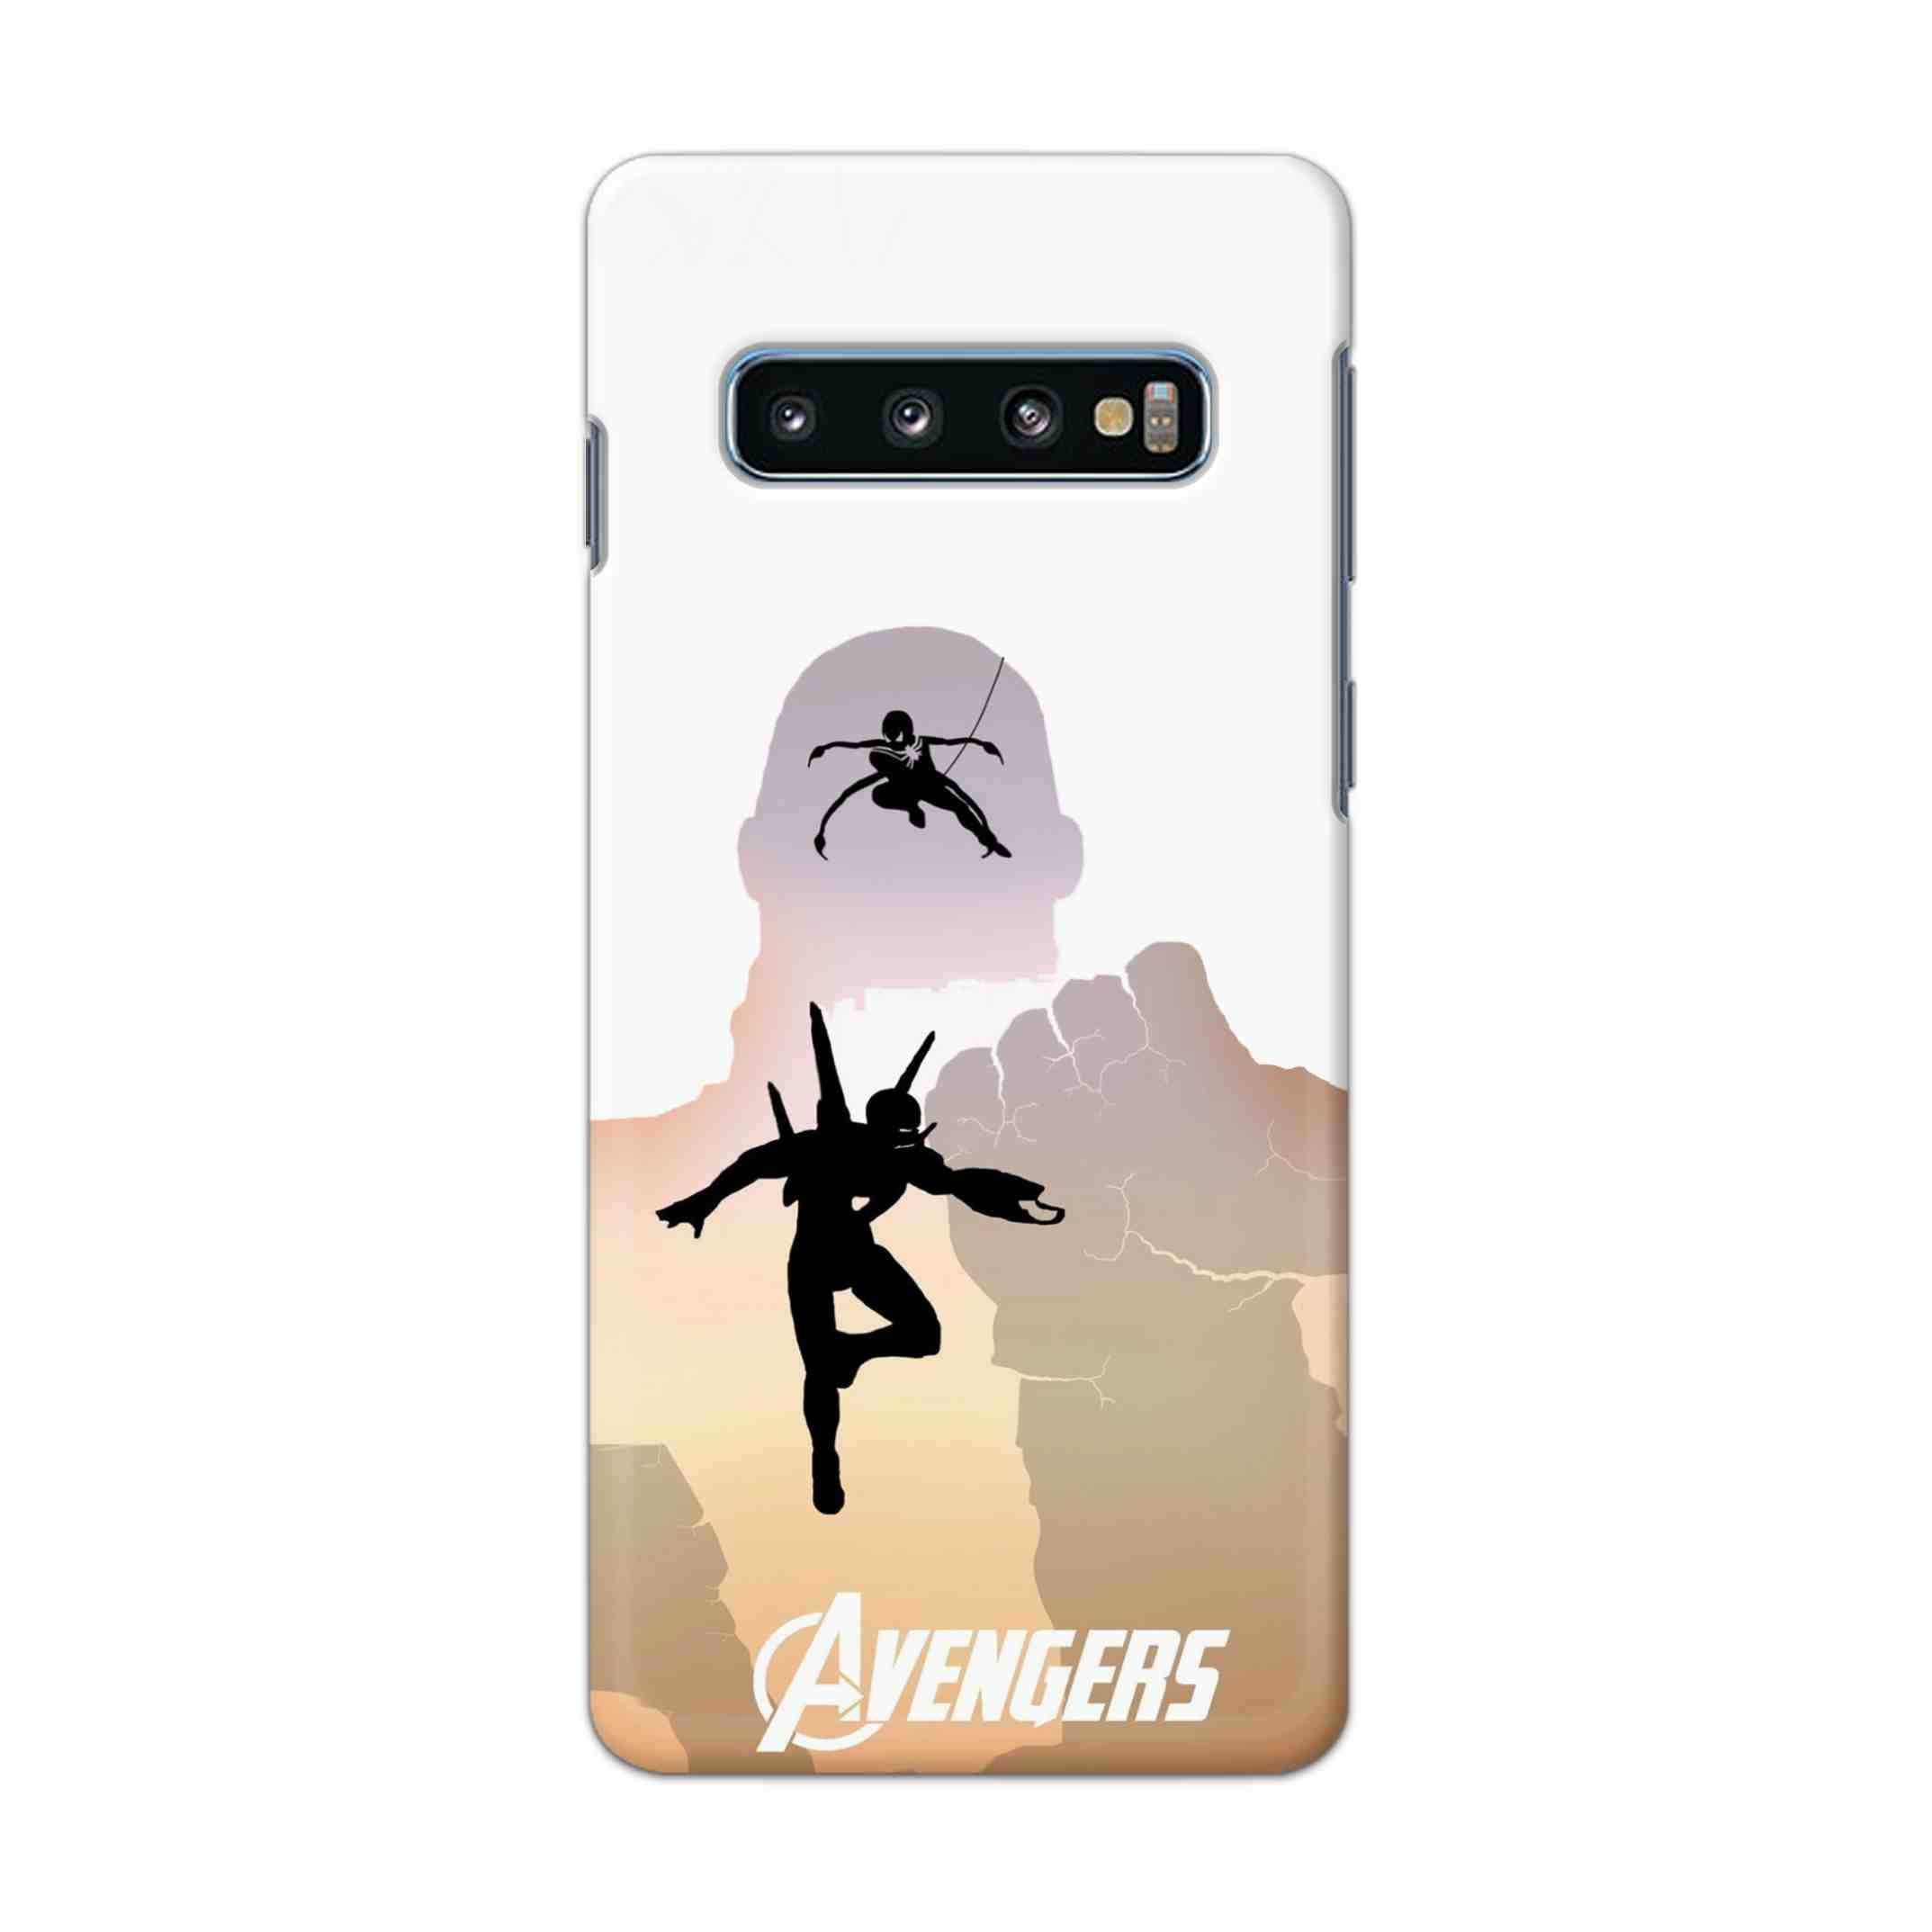 Buy Iron Man Vs Spiderman Hard Back Mobile Phone Case Cover For Samsung Galaxy S10 Plus Online